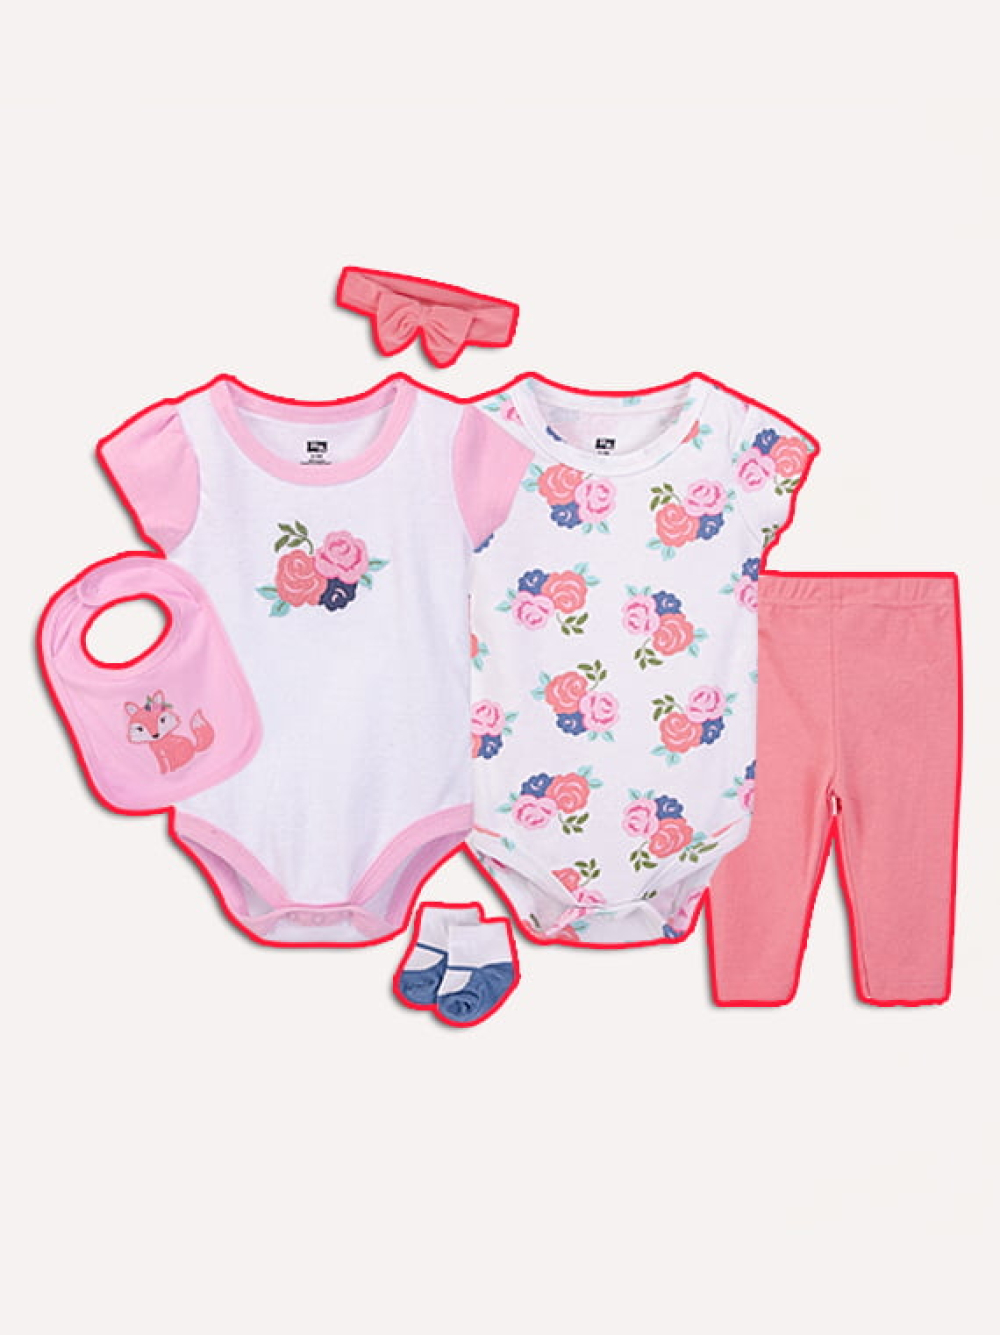 Baby Suit Gift Set